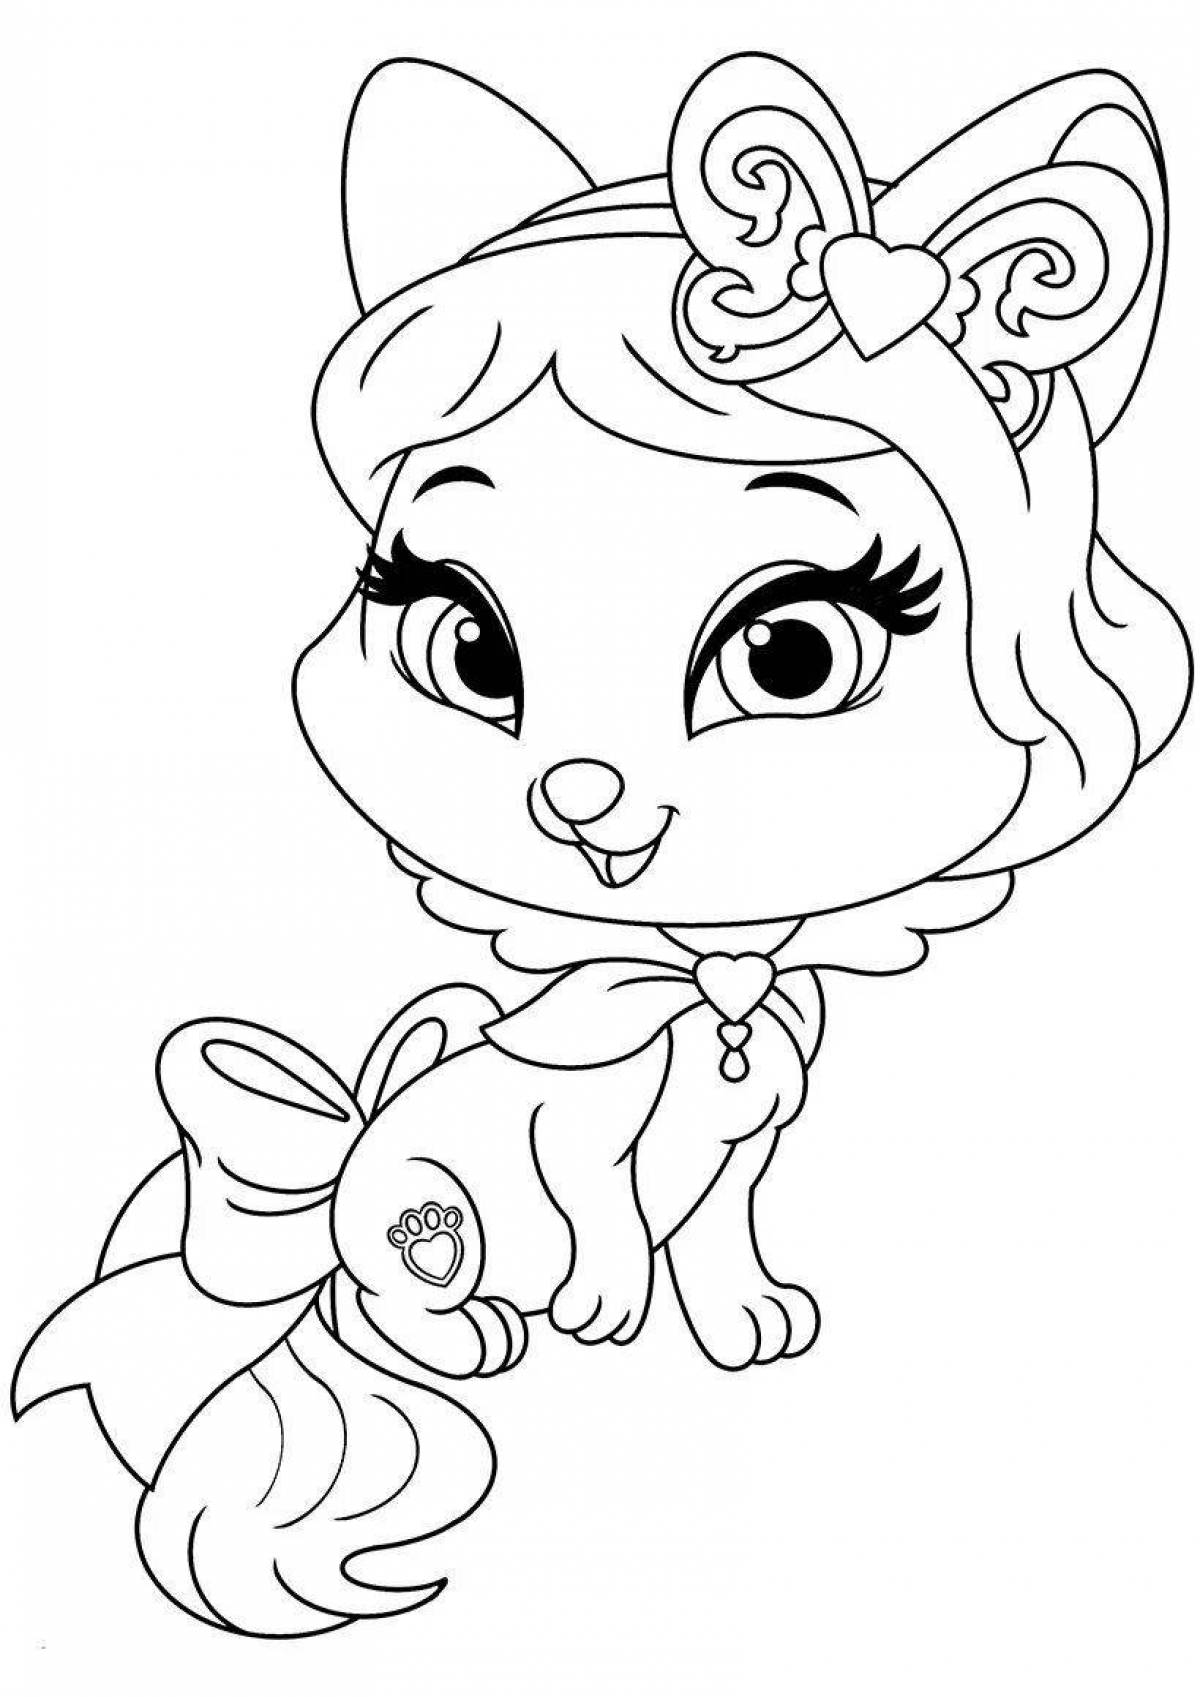 Amazing animal princess coloring book for girls